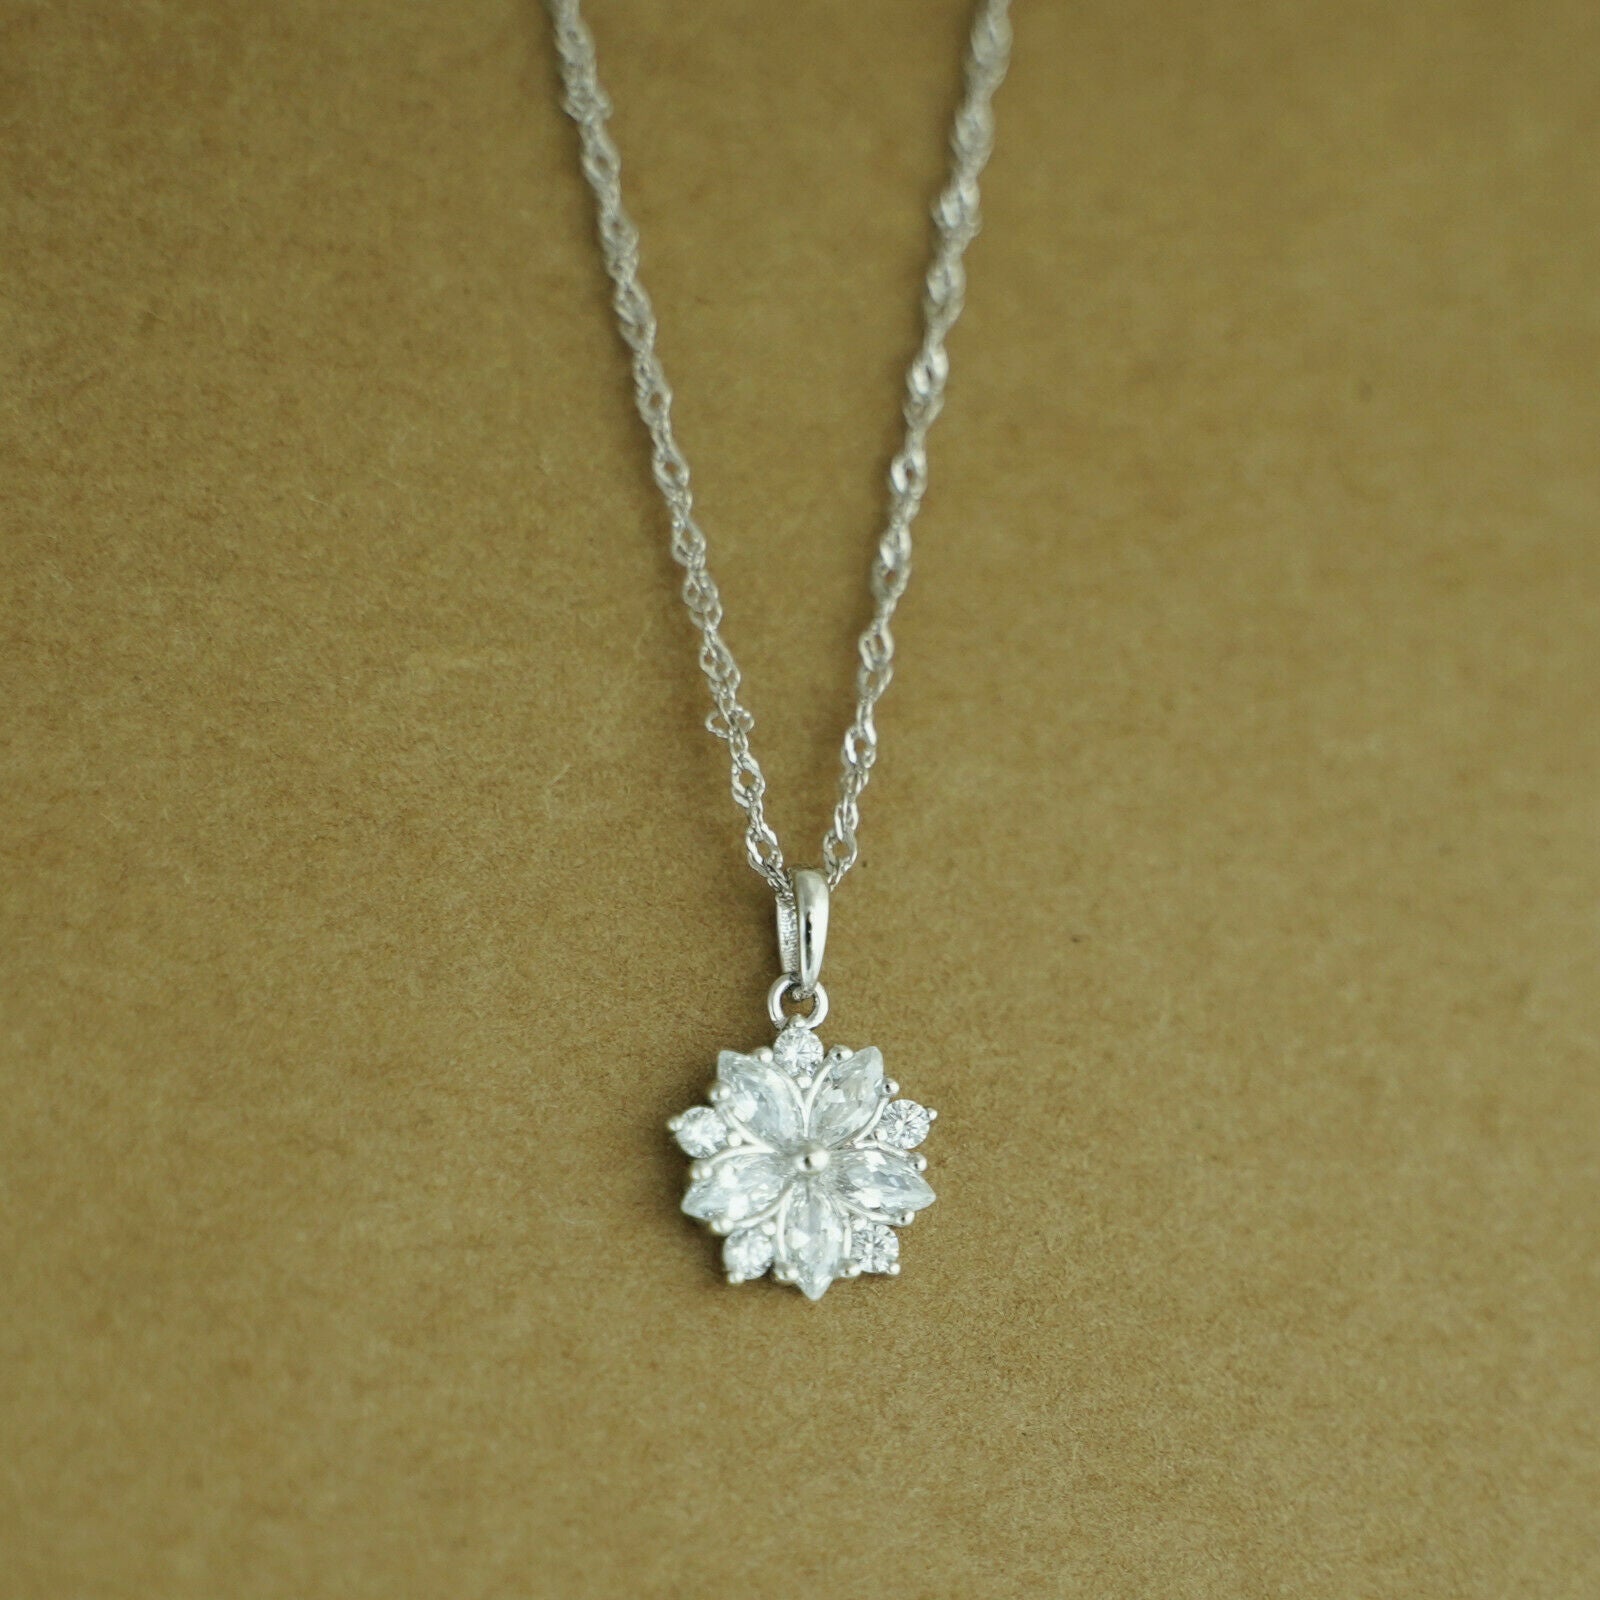 Sterling Silver CZ Crystal Snowflake Flower Pendant Necklace 3 Chains - sugarkittenlondon